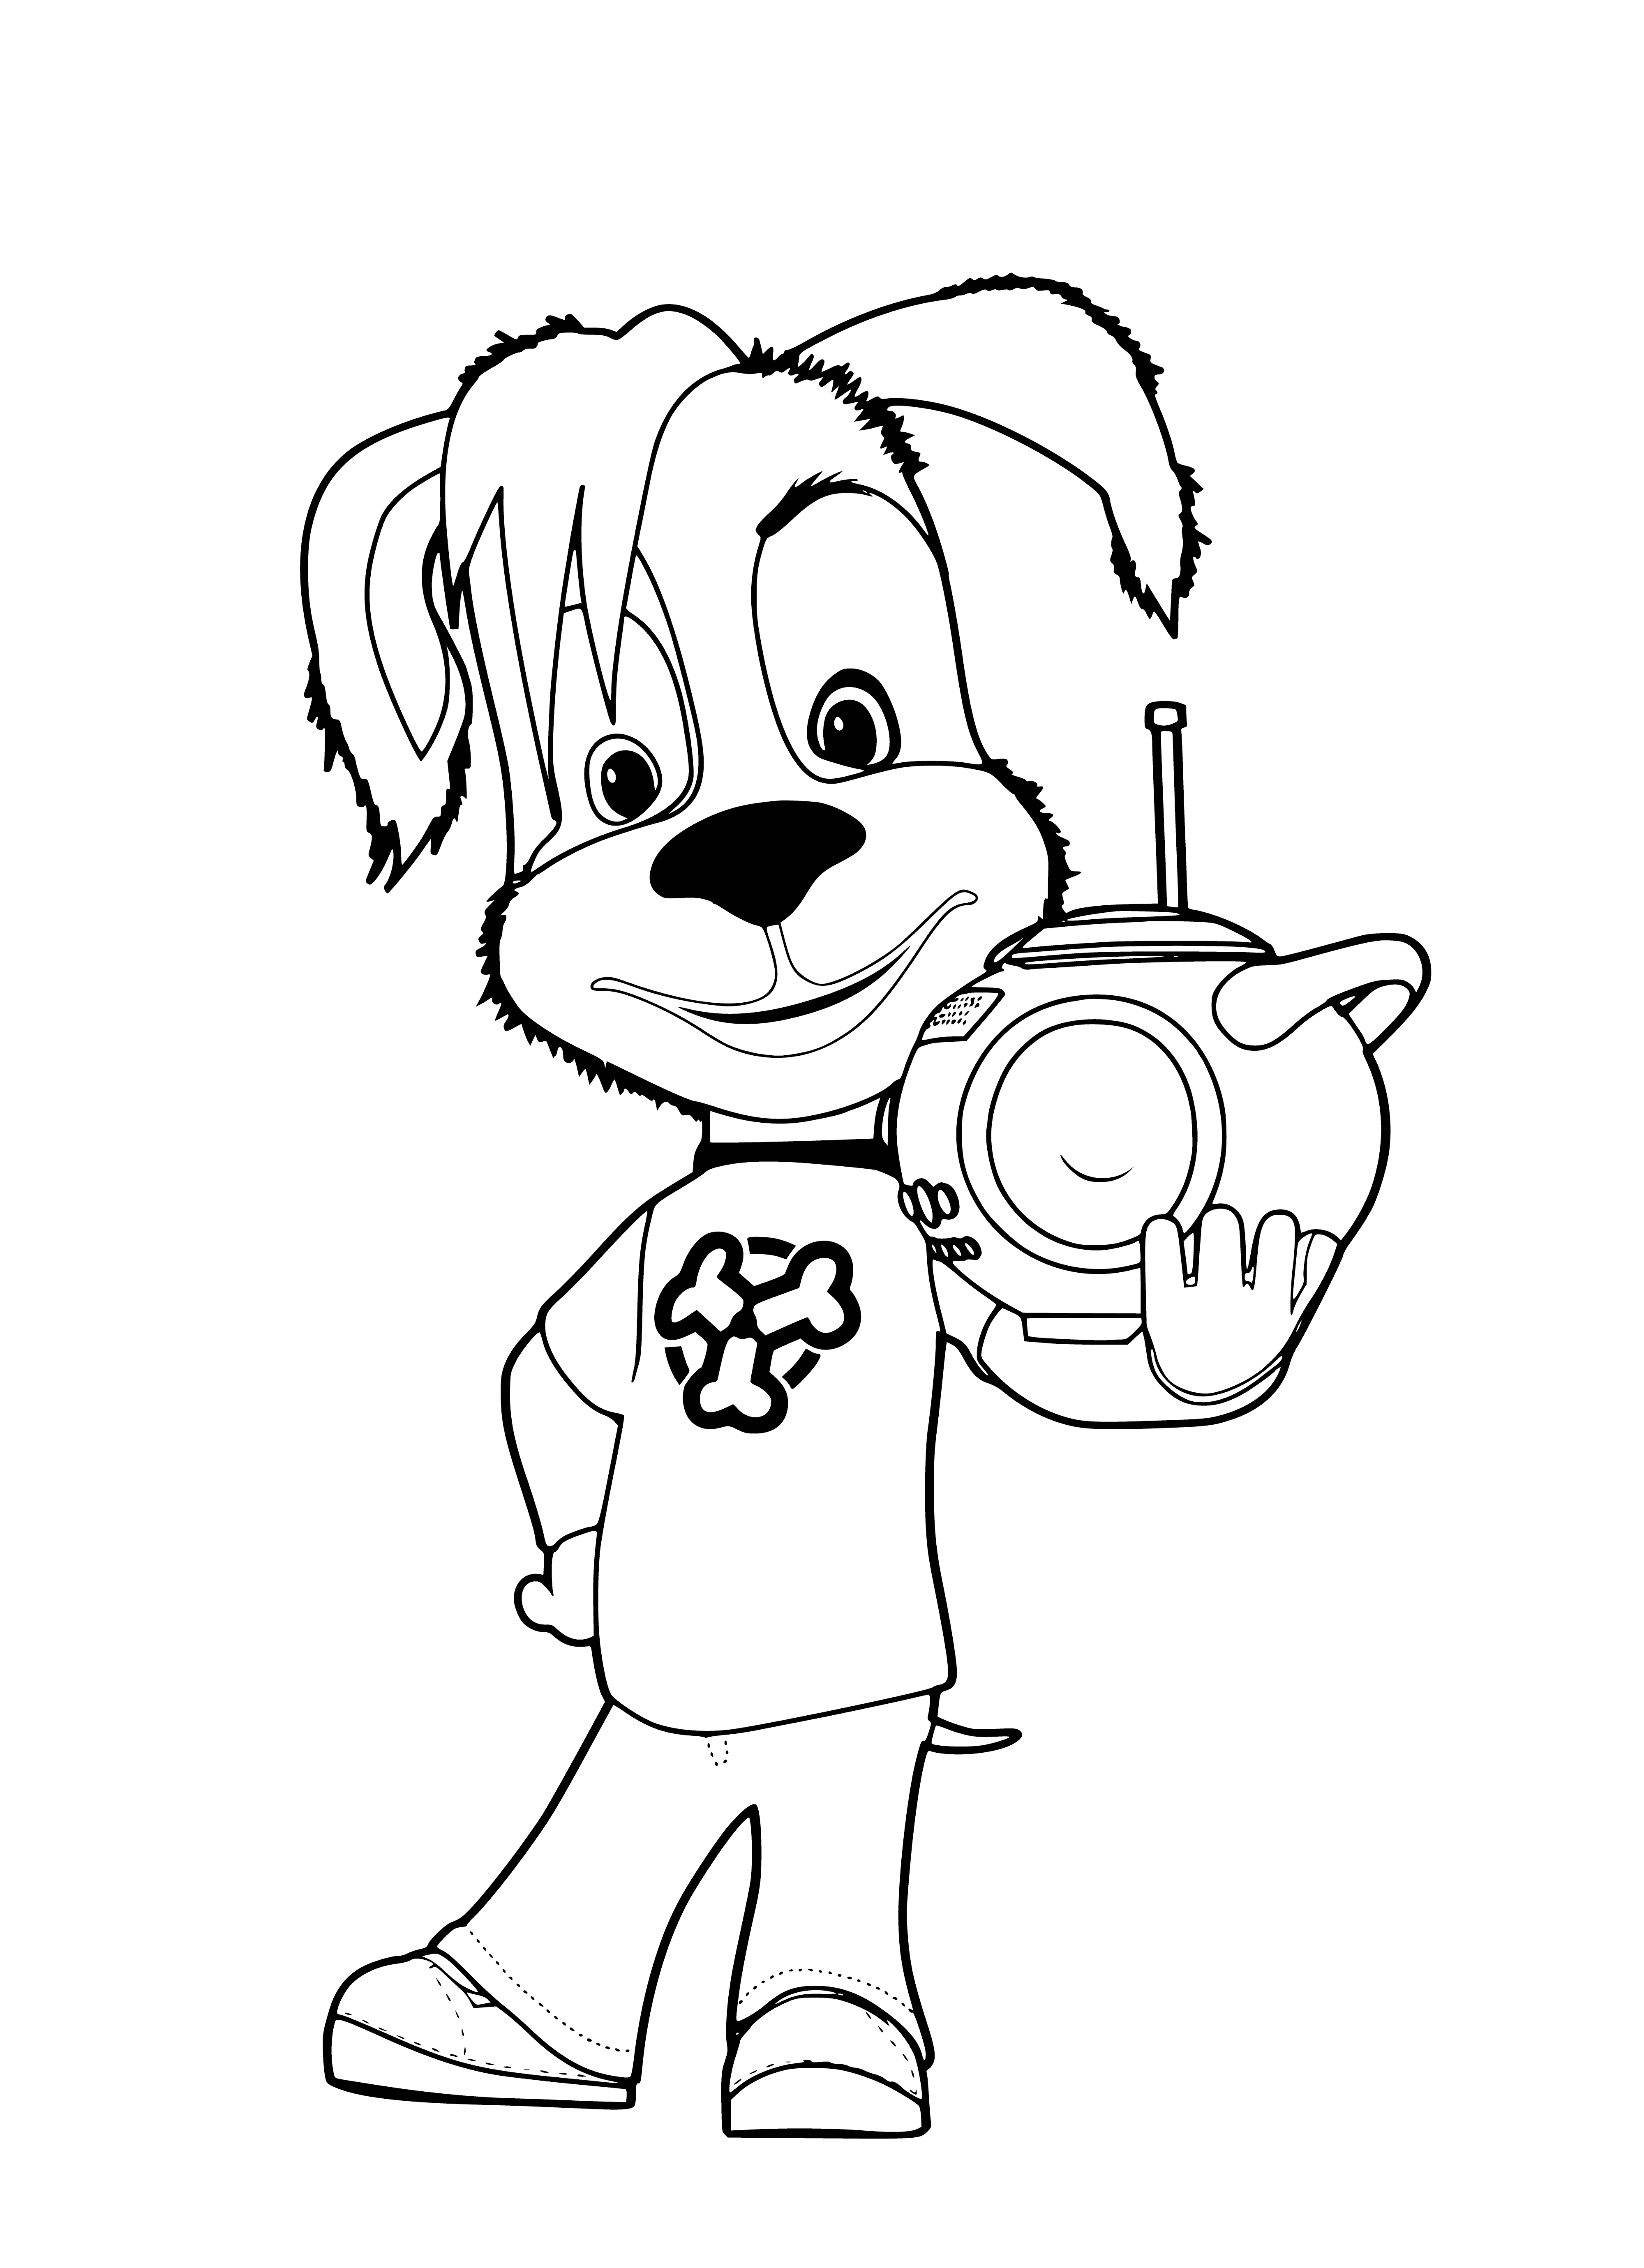 coloring page: The Barboskins' Boombox Buddy is a furry friend with a red cape, boots & a boombox; it has big, floppy ears & a toothy grin. #boomboxbuddy